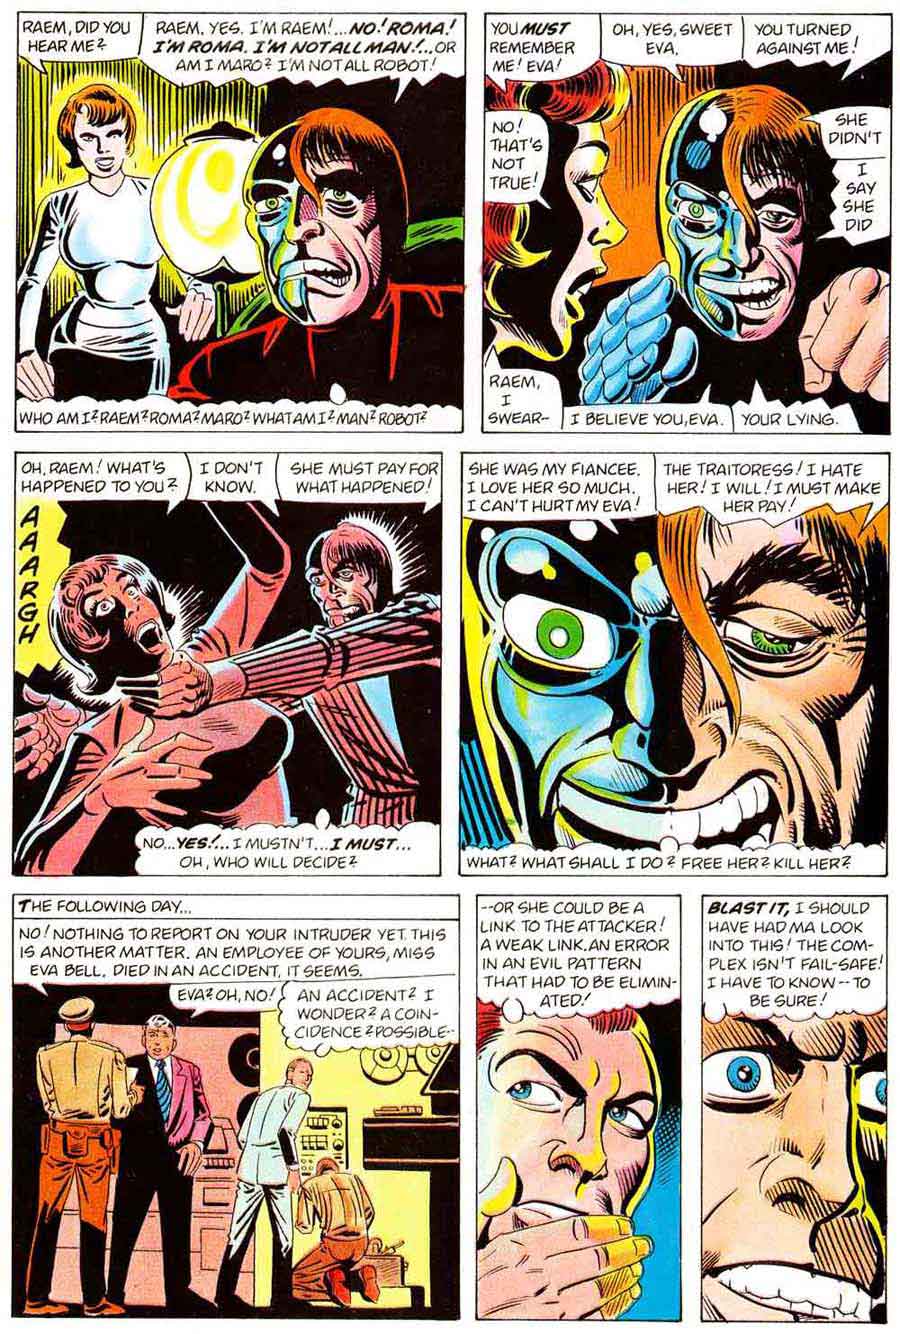 Pacific Presents v1 #3 - Steve Ditko art 1980s pacific comic book page